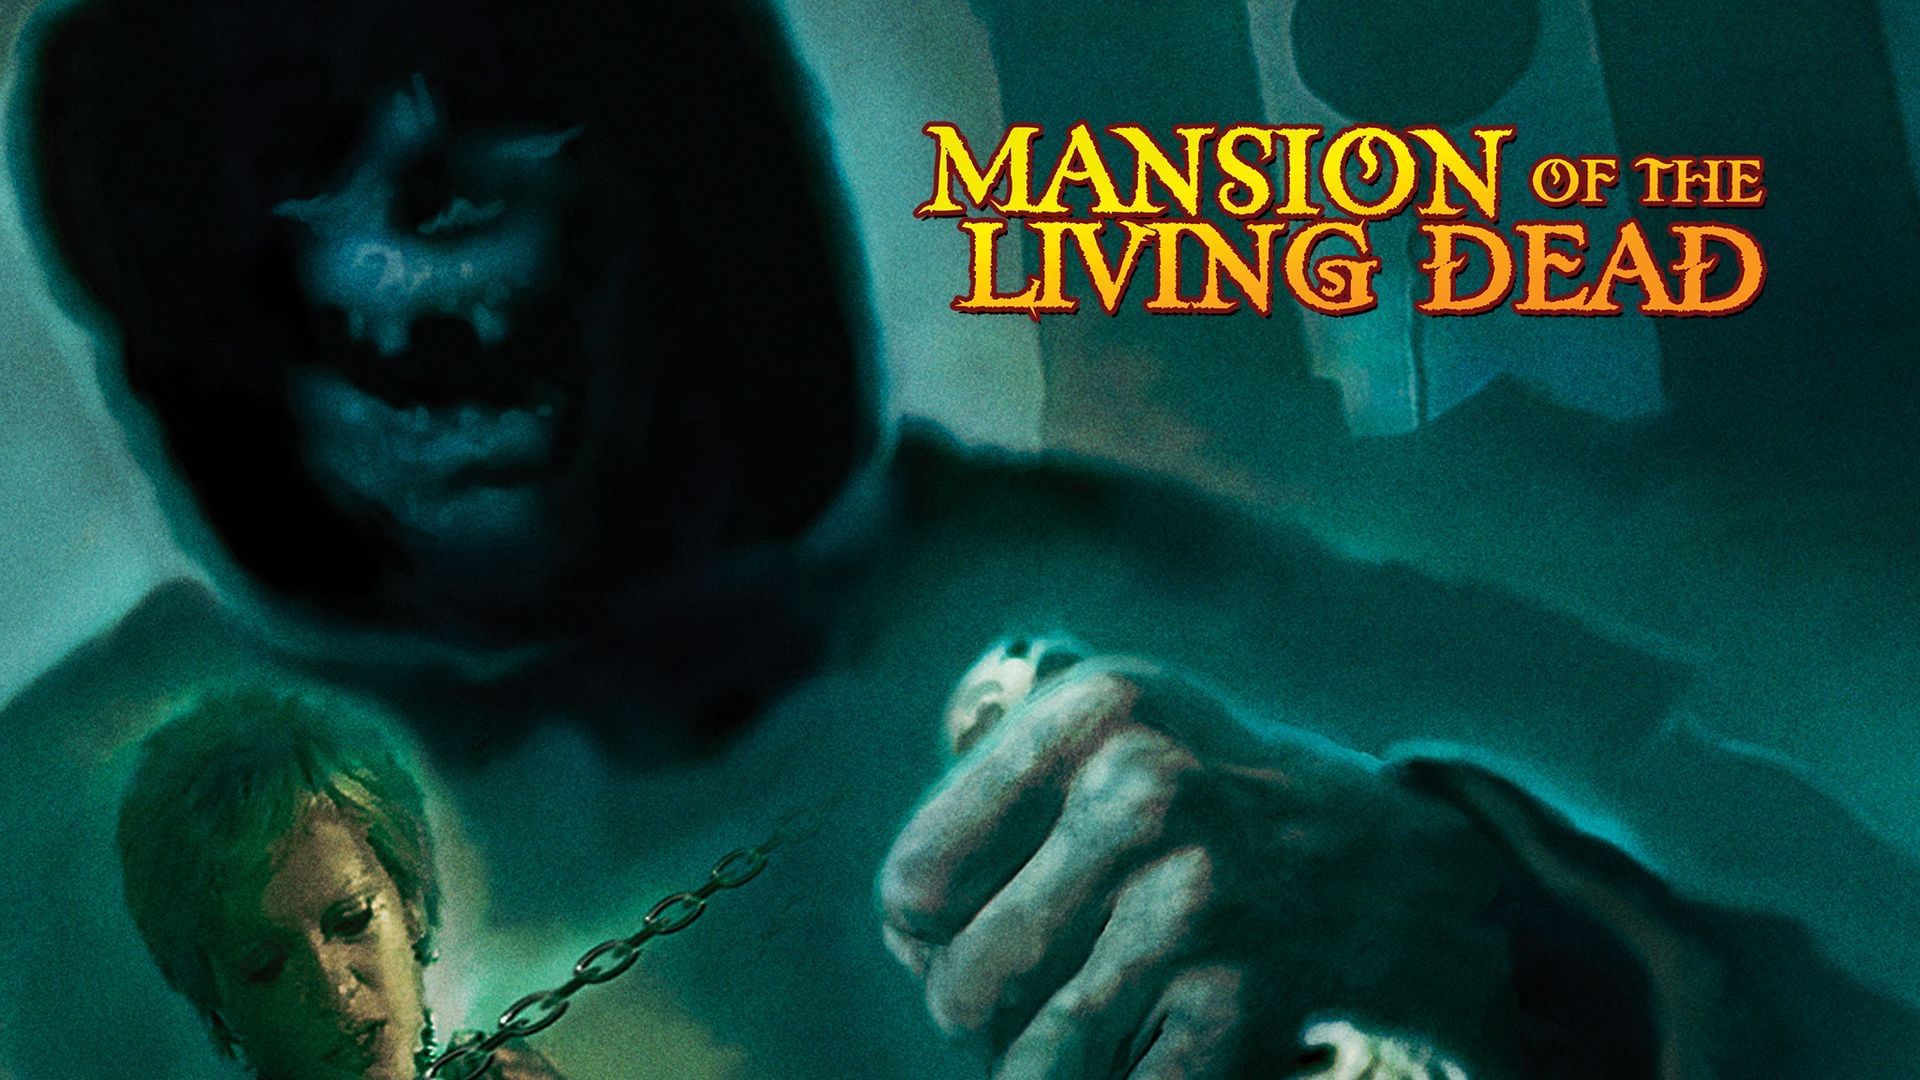 Mansion of the Living Dead Backdrop